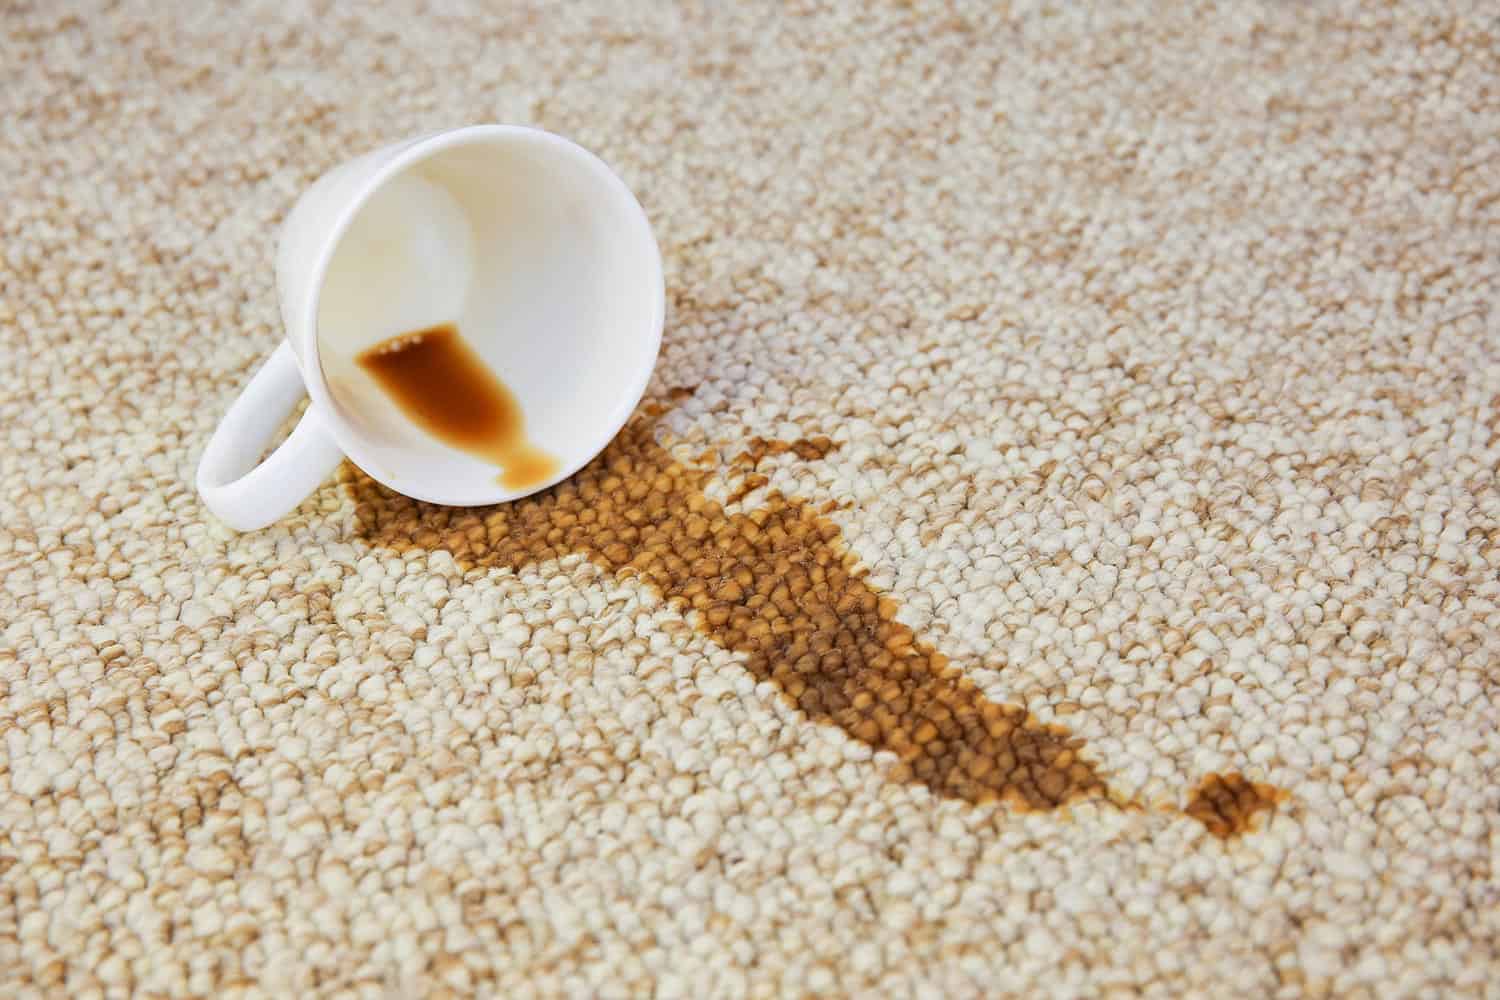 Cup of coffee fell on carpet